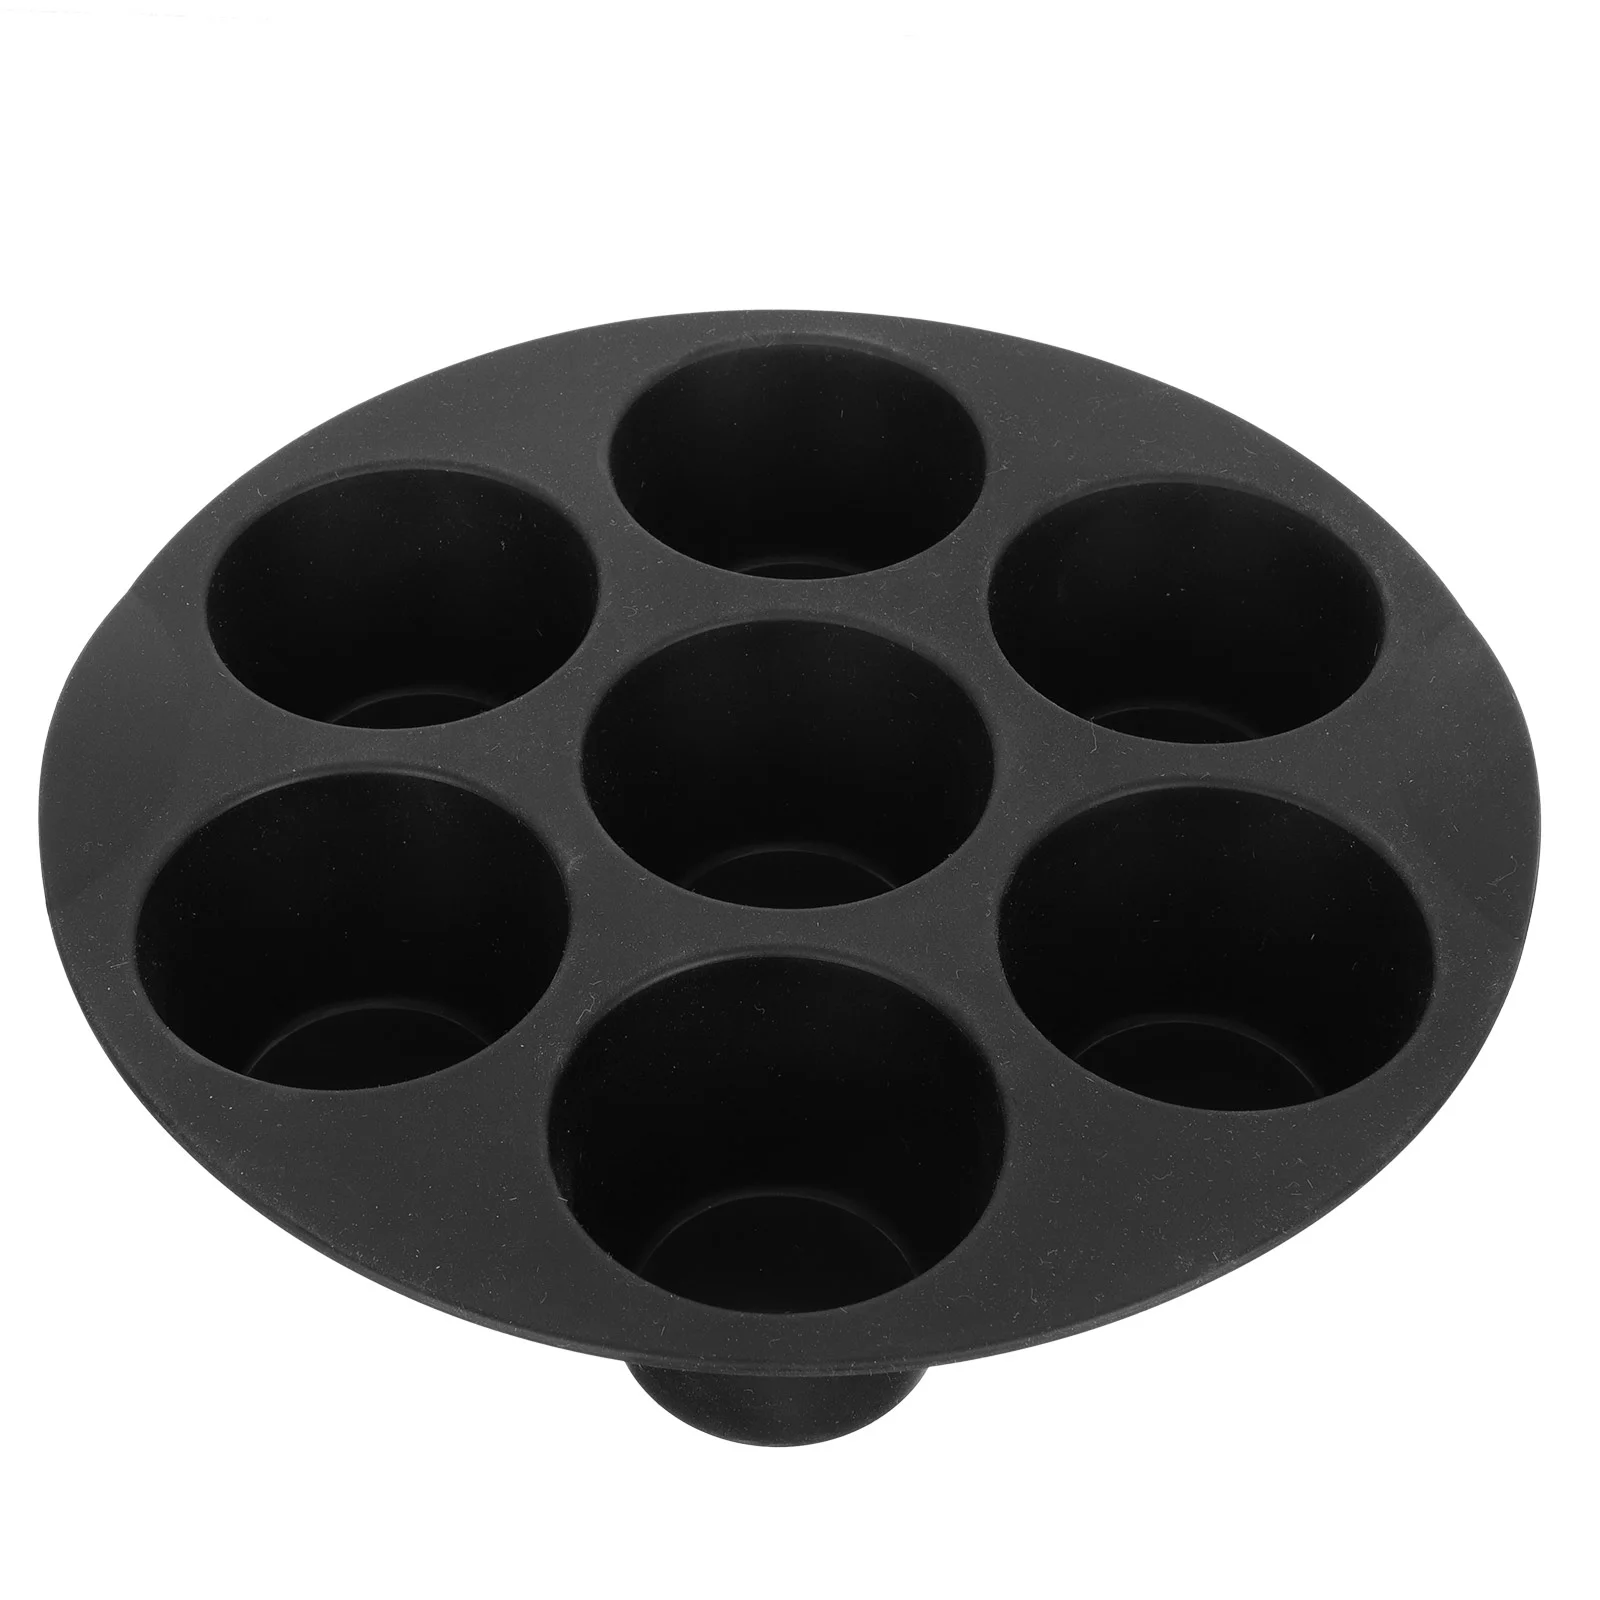 

Muffin Pan Baking Cake Cupcake Air Fryer Silicone Cups Mold Tray Pans Molds Mini Moulds Chocolate Holes Accessories Rubber Round